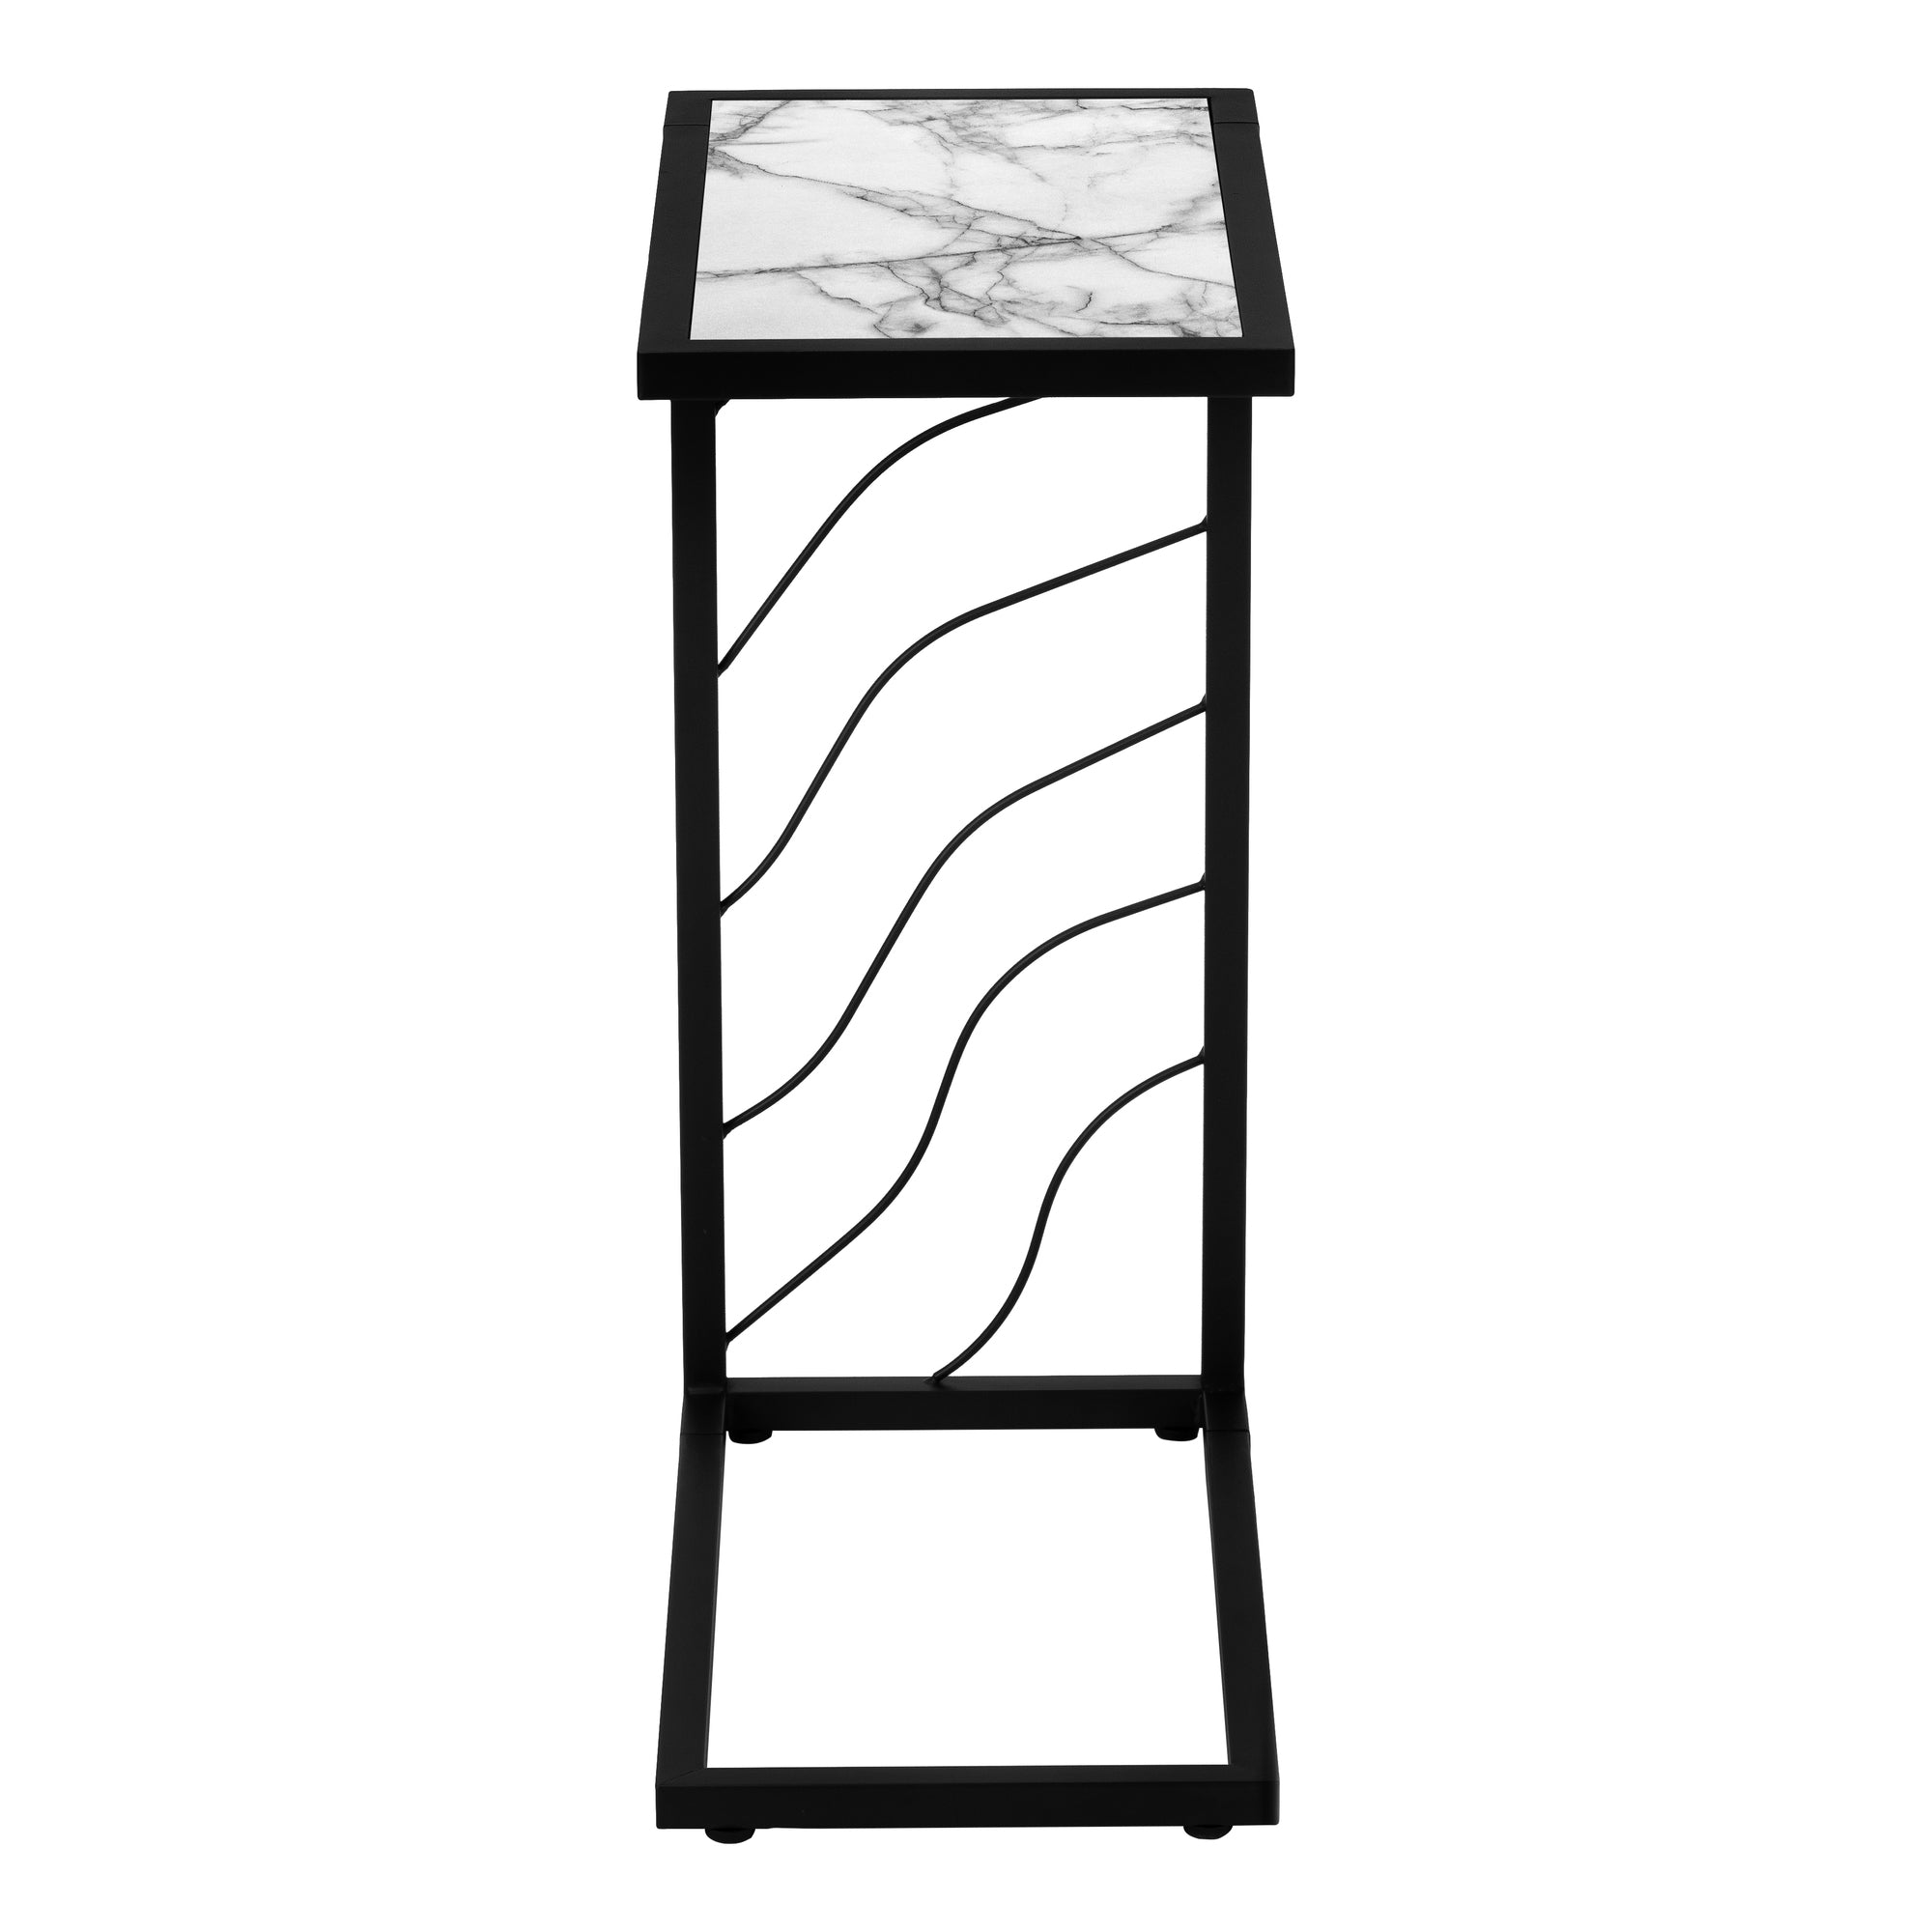 MN-203300    Accent Table, C-Shaped, End, Side, Snack, Living Room, Bedroom, Metal Frame, Laminate, White Marble Look, Black, Contemporary, Modern